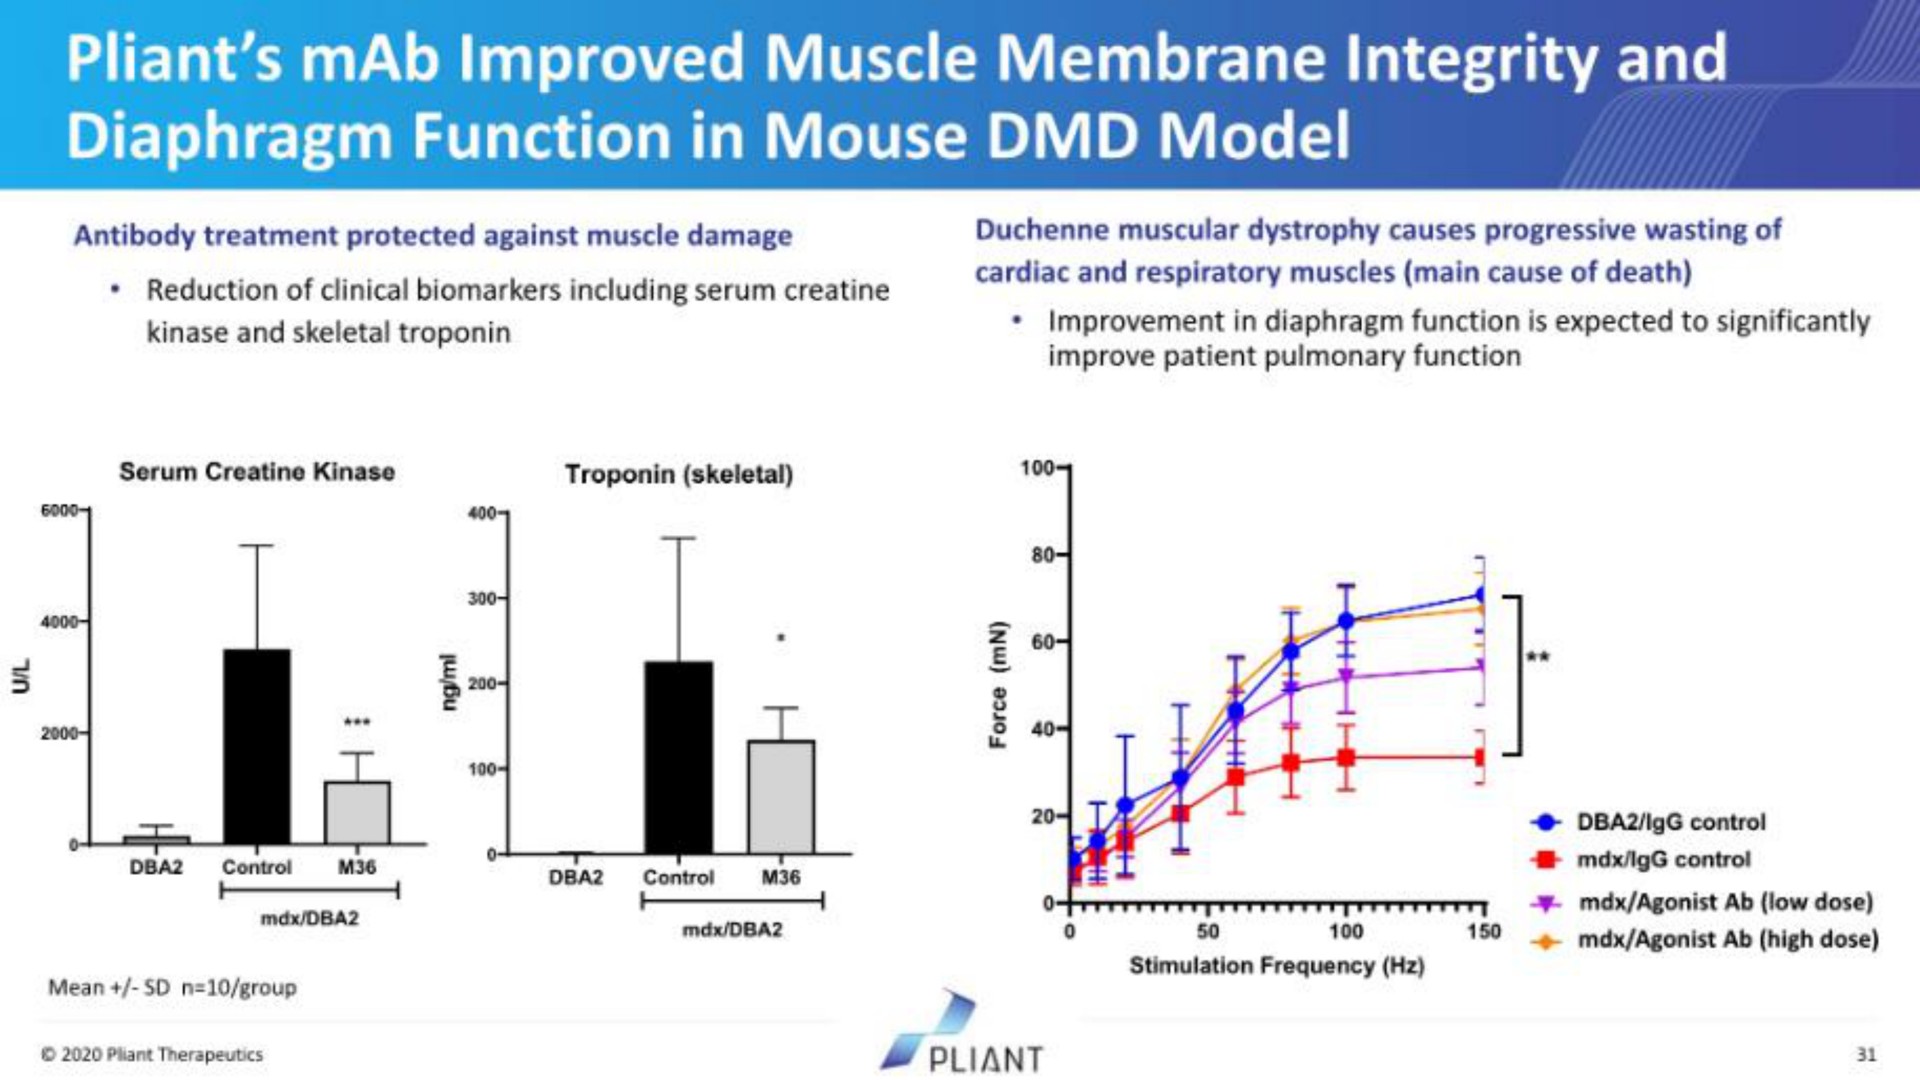 pliant improved muscle membrane integrity and diaphragm function in mouse model | Pilant Therapeutics